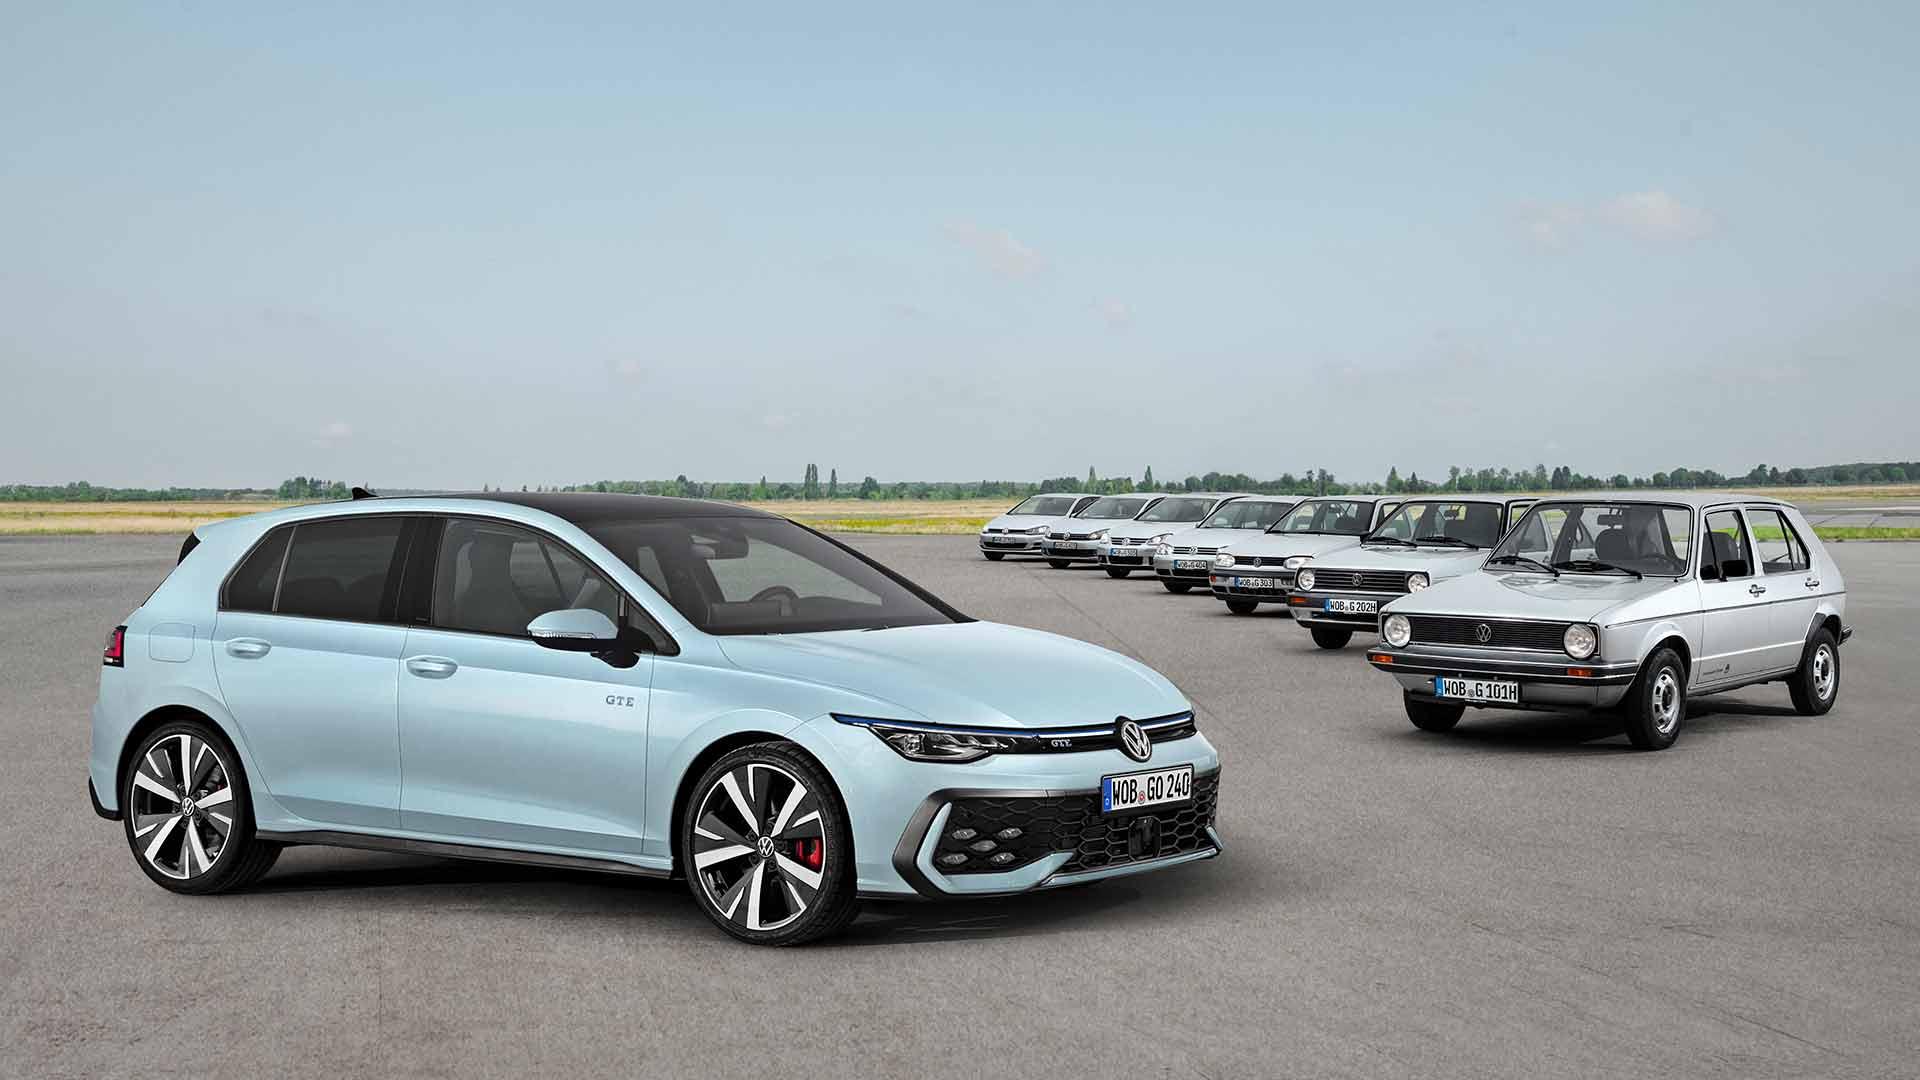 How much has the Volkswagen Golf really become?